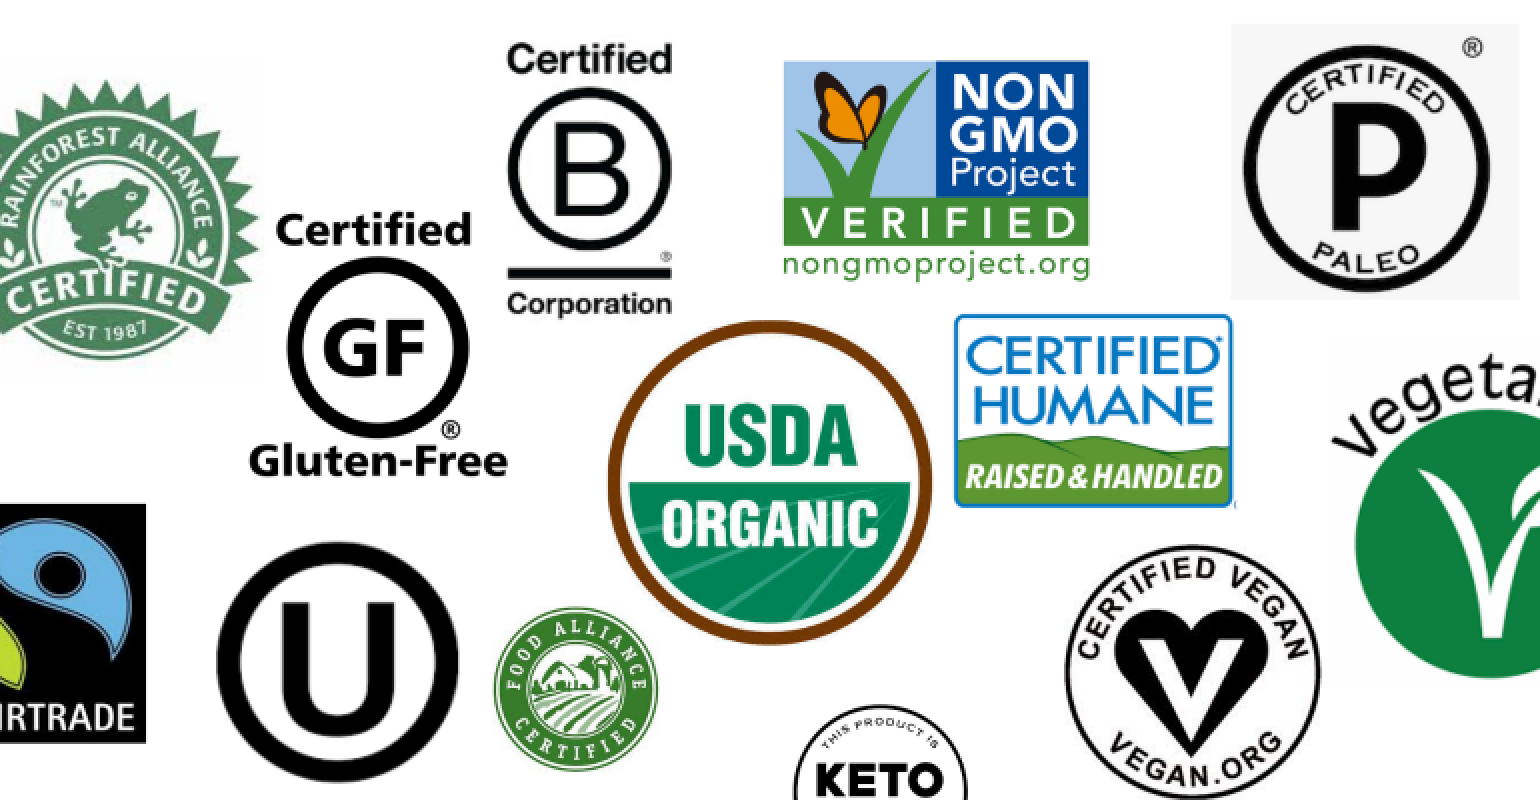 Expanding certifications on natural foods | Supermarket News